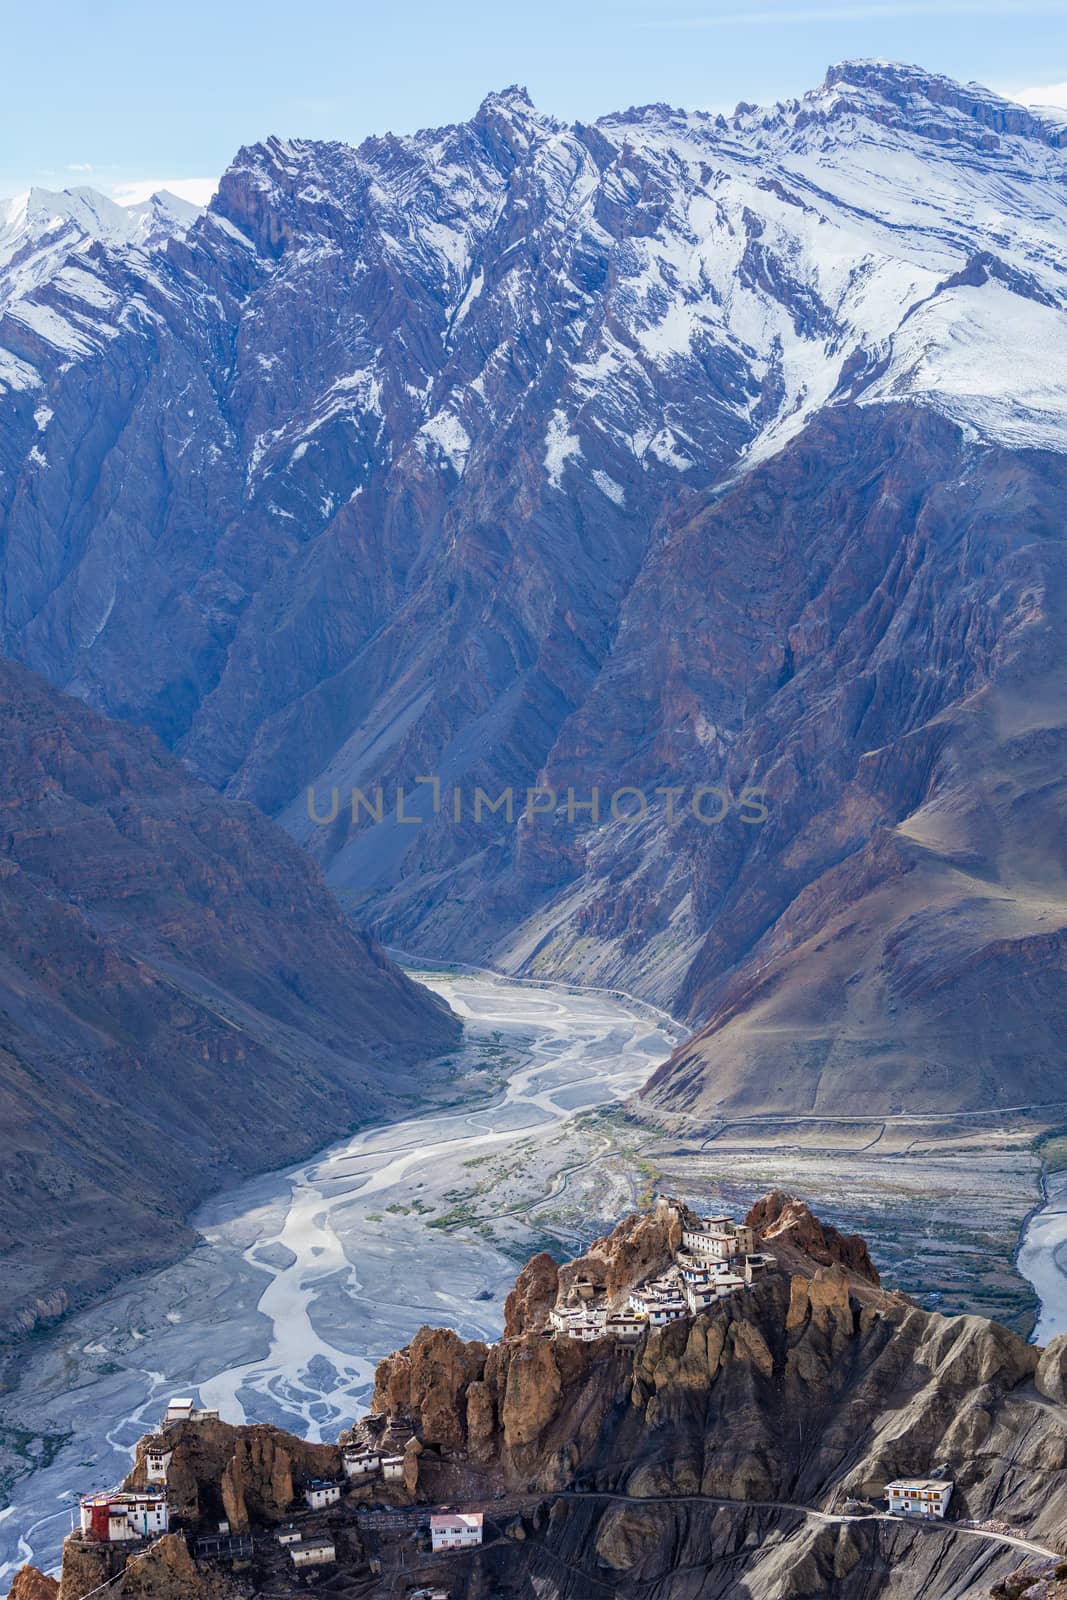 Dhankar monastry perched on a cliff in Himalayas, India by dimol